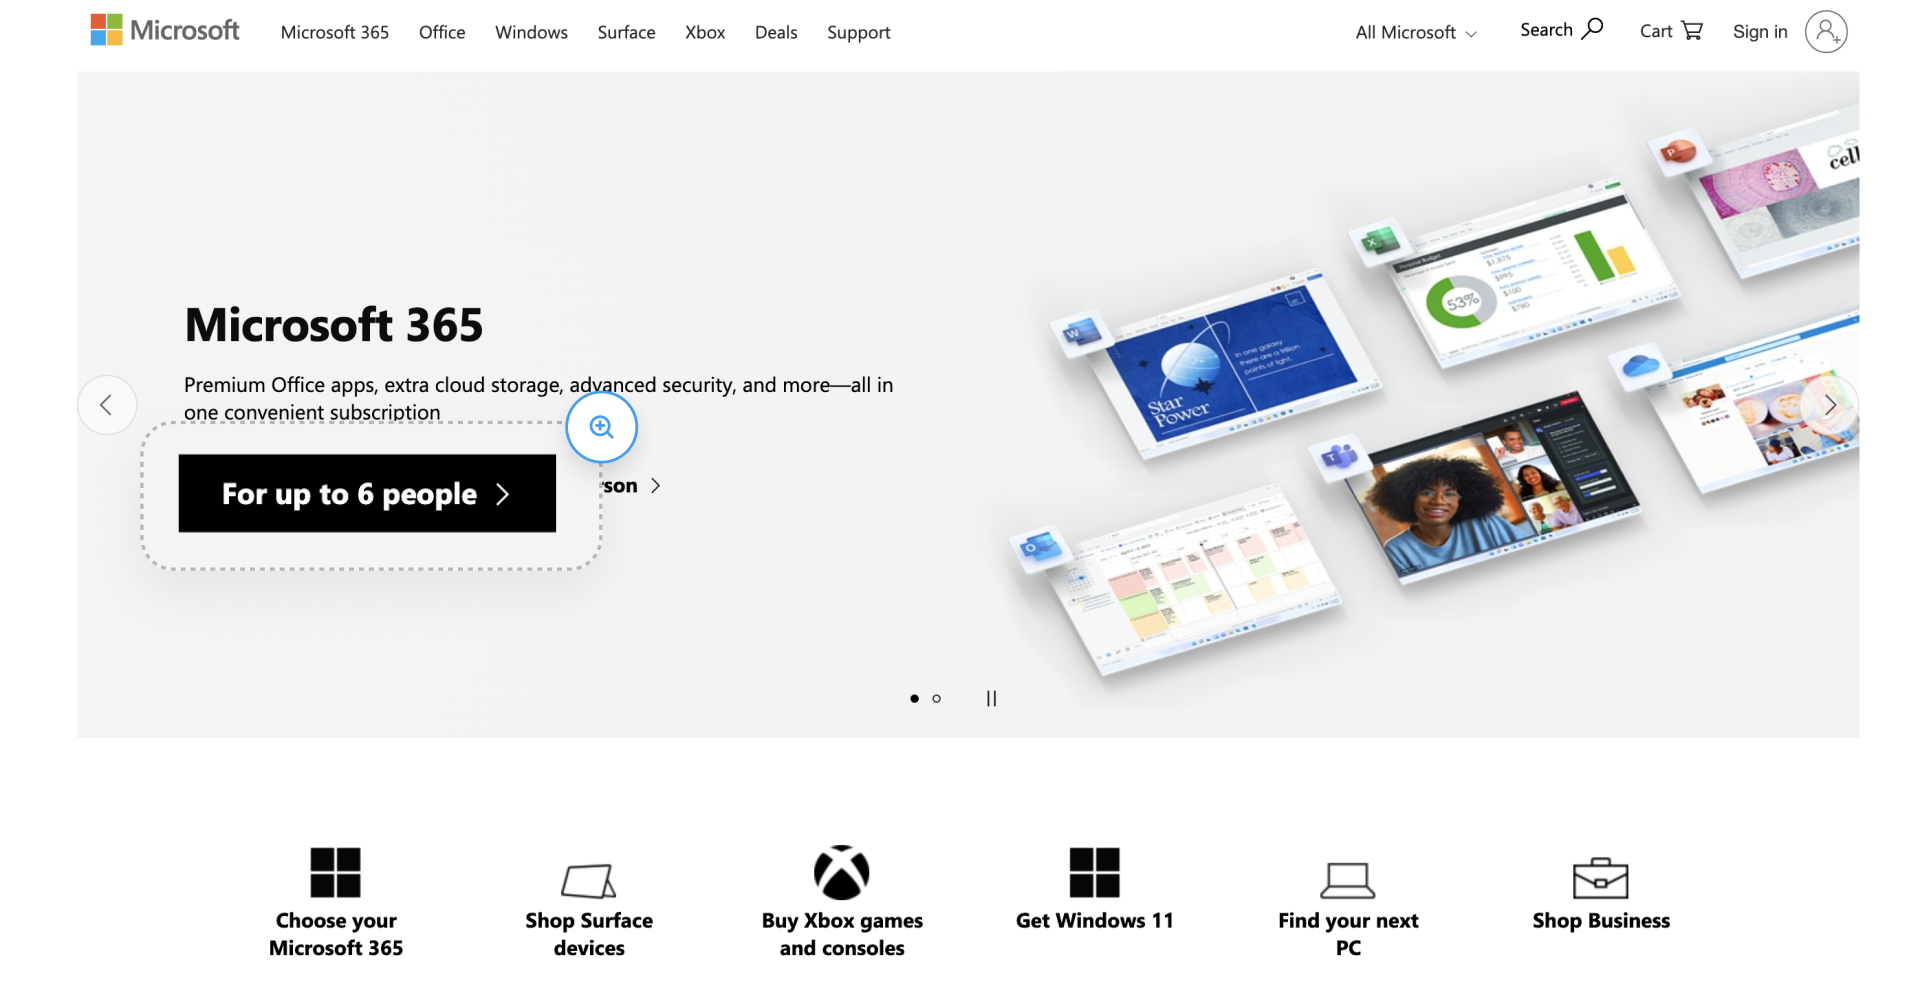 Microsoft 365 landing page screenshot with black For up to 6 people call-to-action button